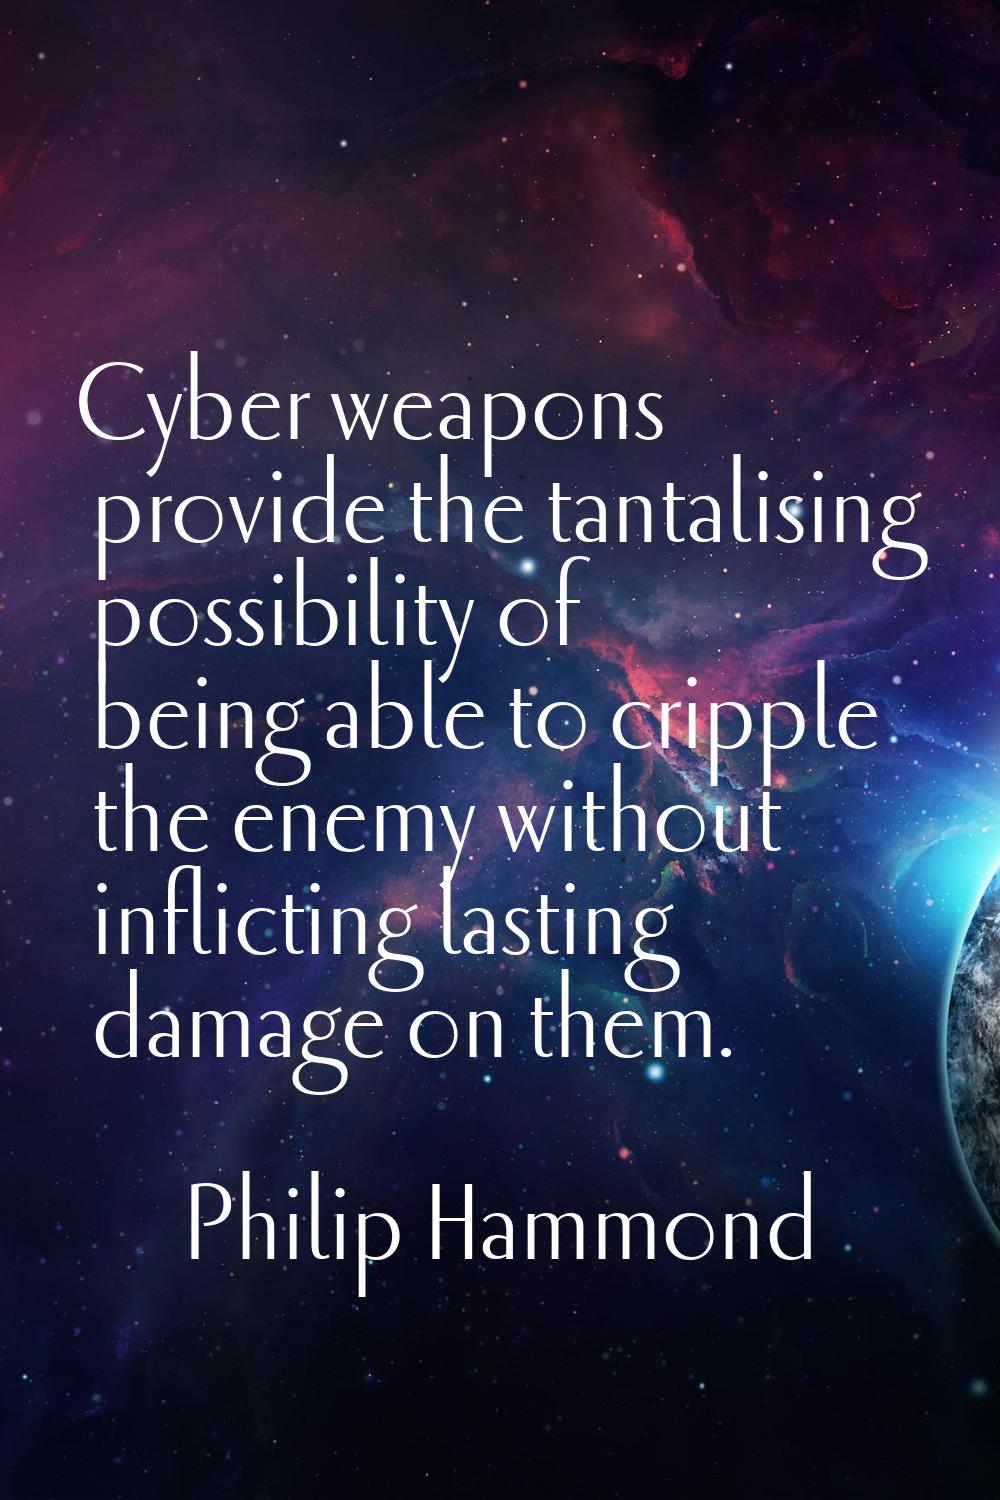 Cyber weapons provide the tantalising possibility of being able to cripple the enemy without inflic